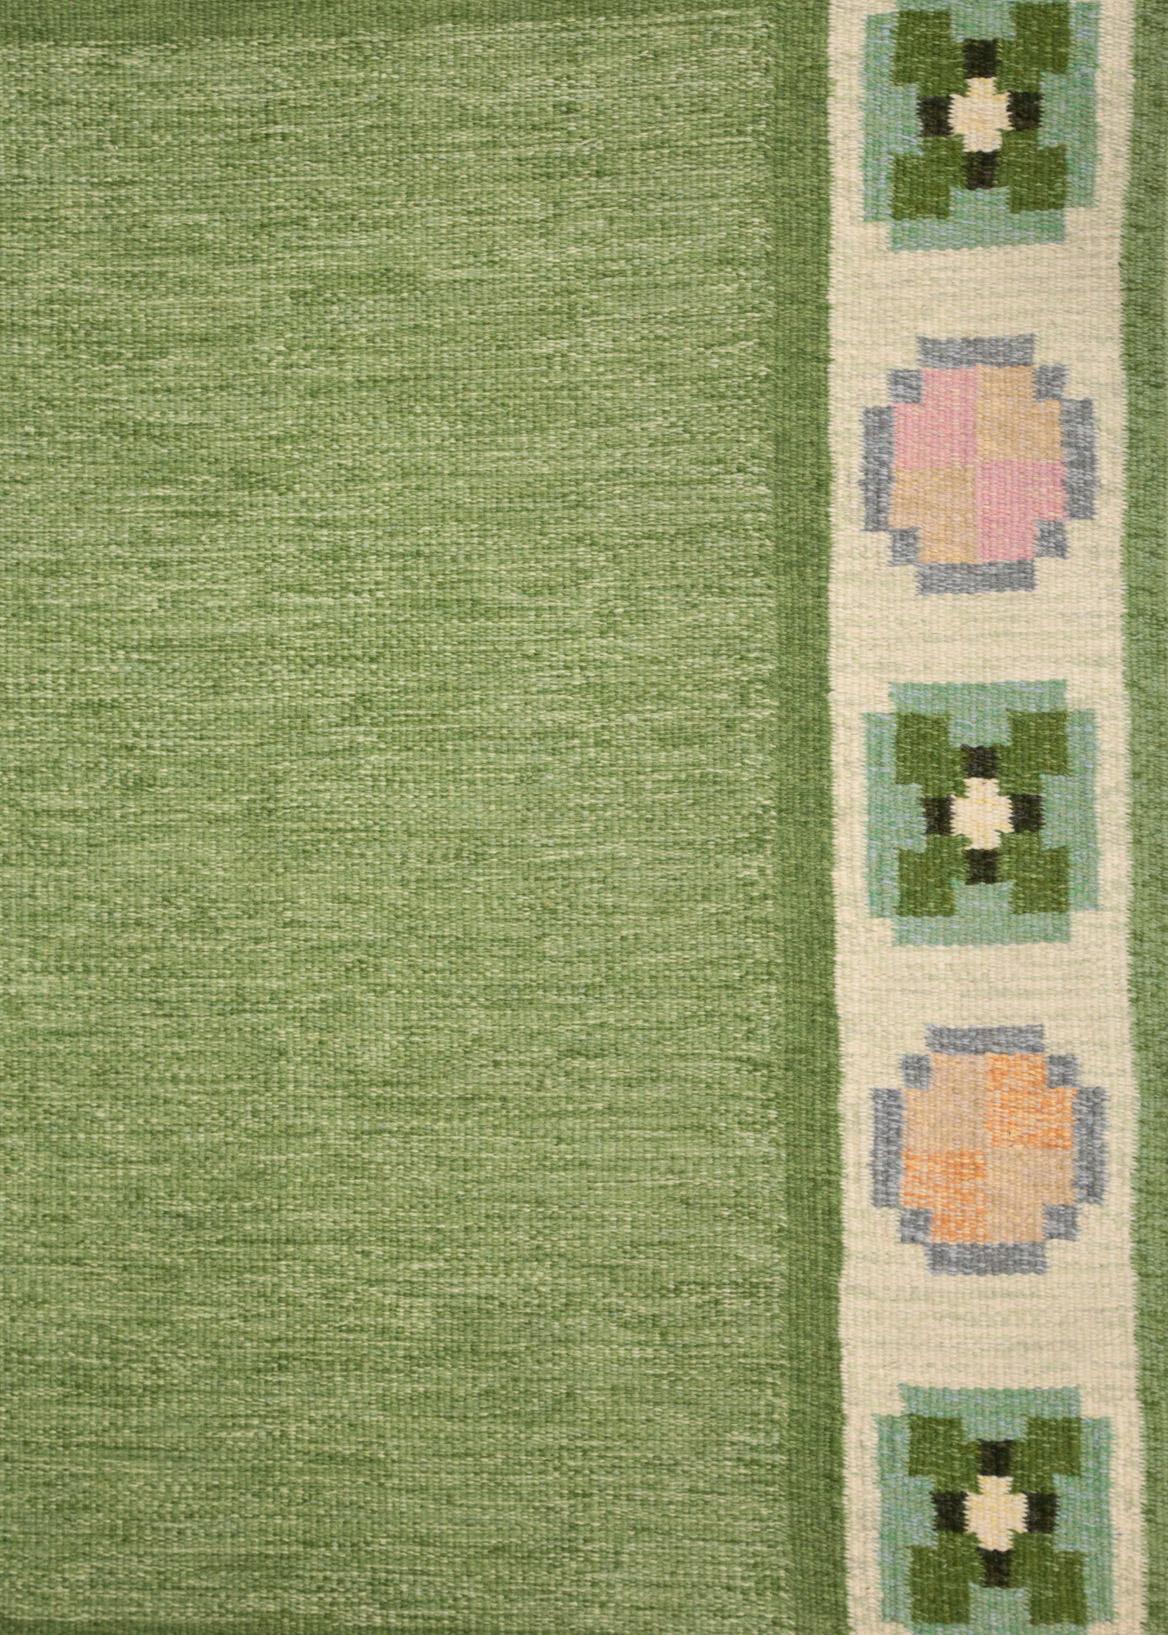 Scandinavian rug from the 60's by the Swedish artist Ingegerd Silow. Flat weaving technique (rillakan), wool on linen. Traditional geometrical patterns in green, pink and beige. Handwoven in Sweden in the 50s/60s. Excellent vintage condition (see